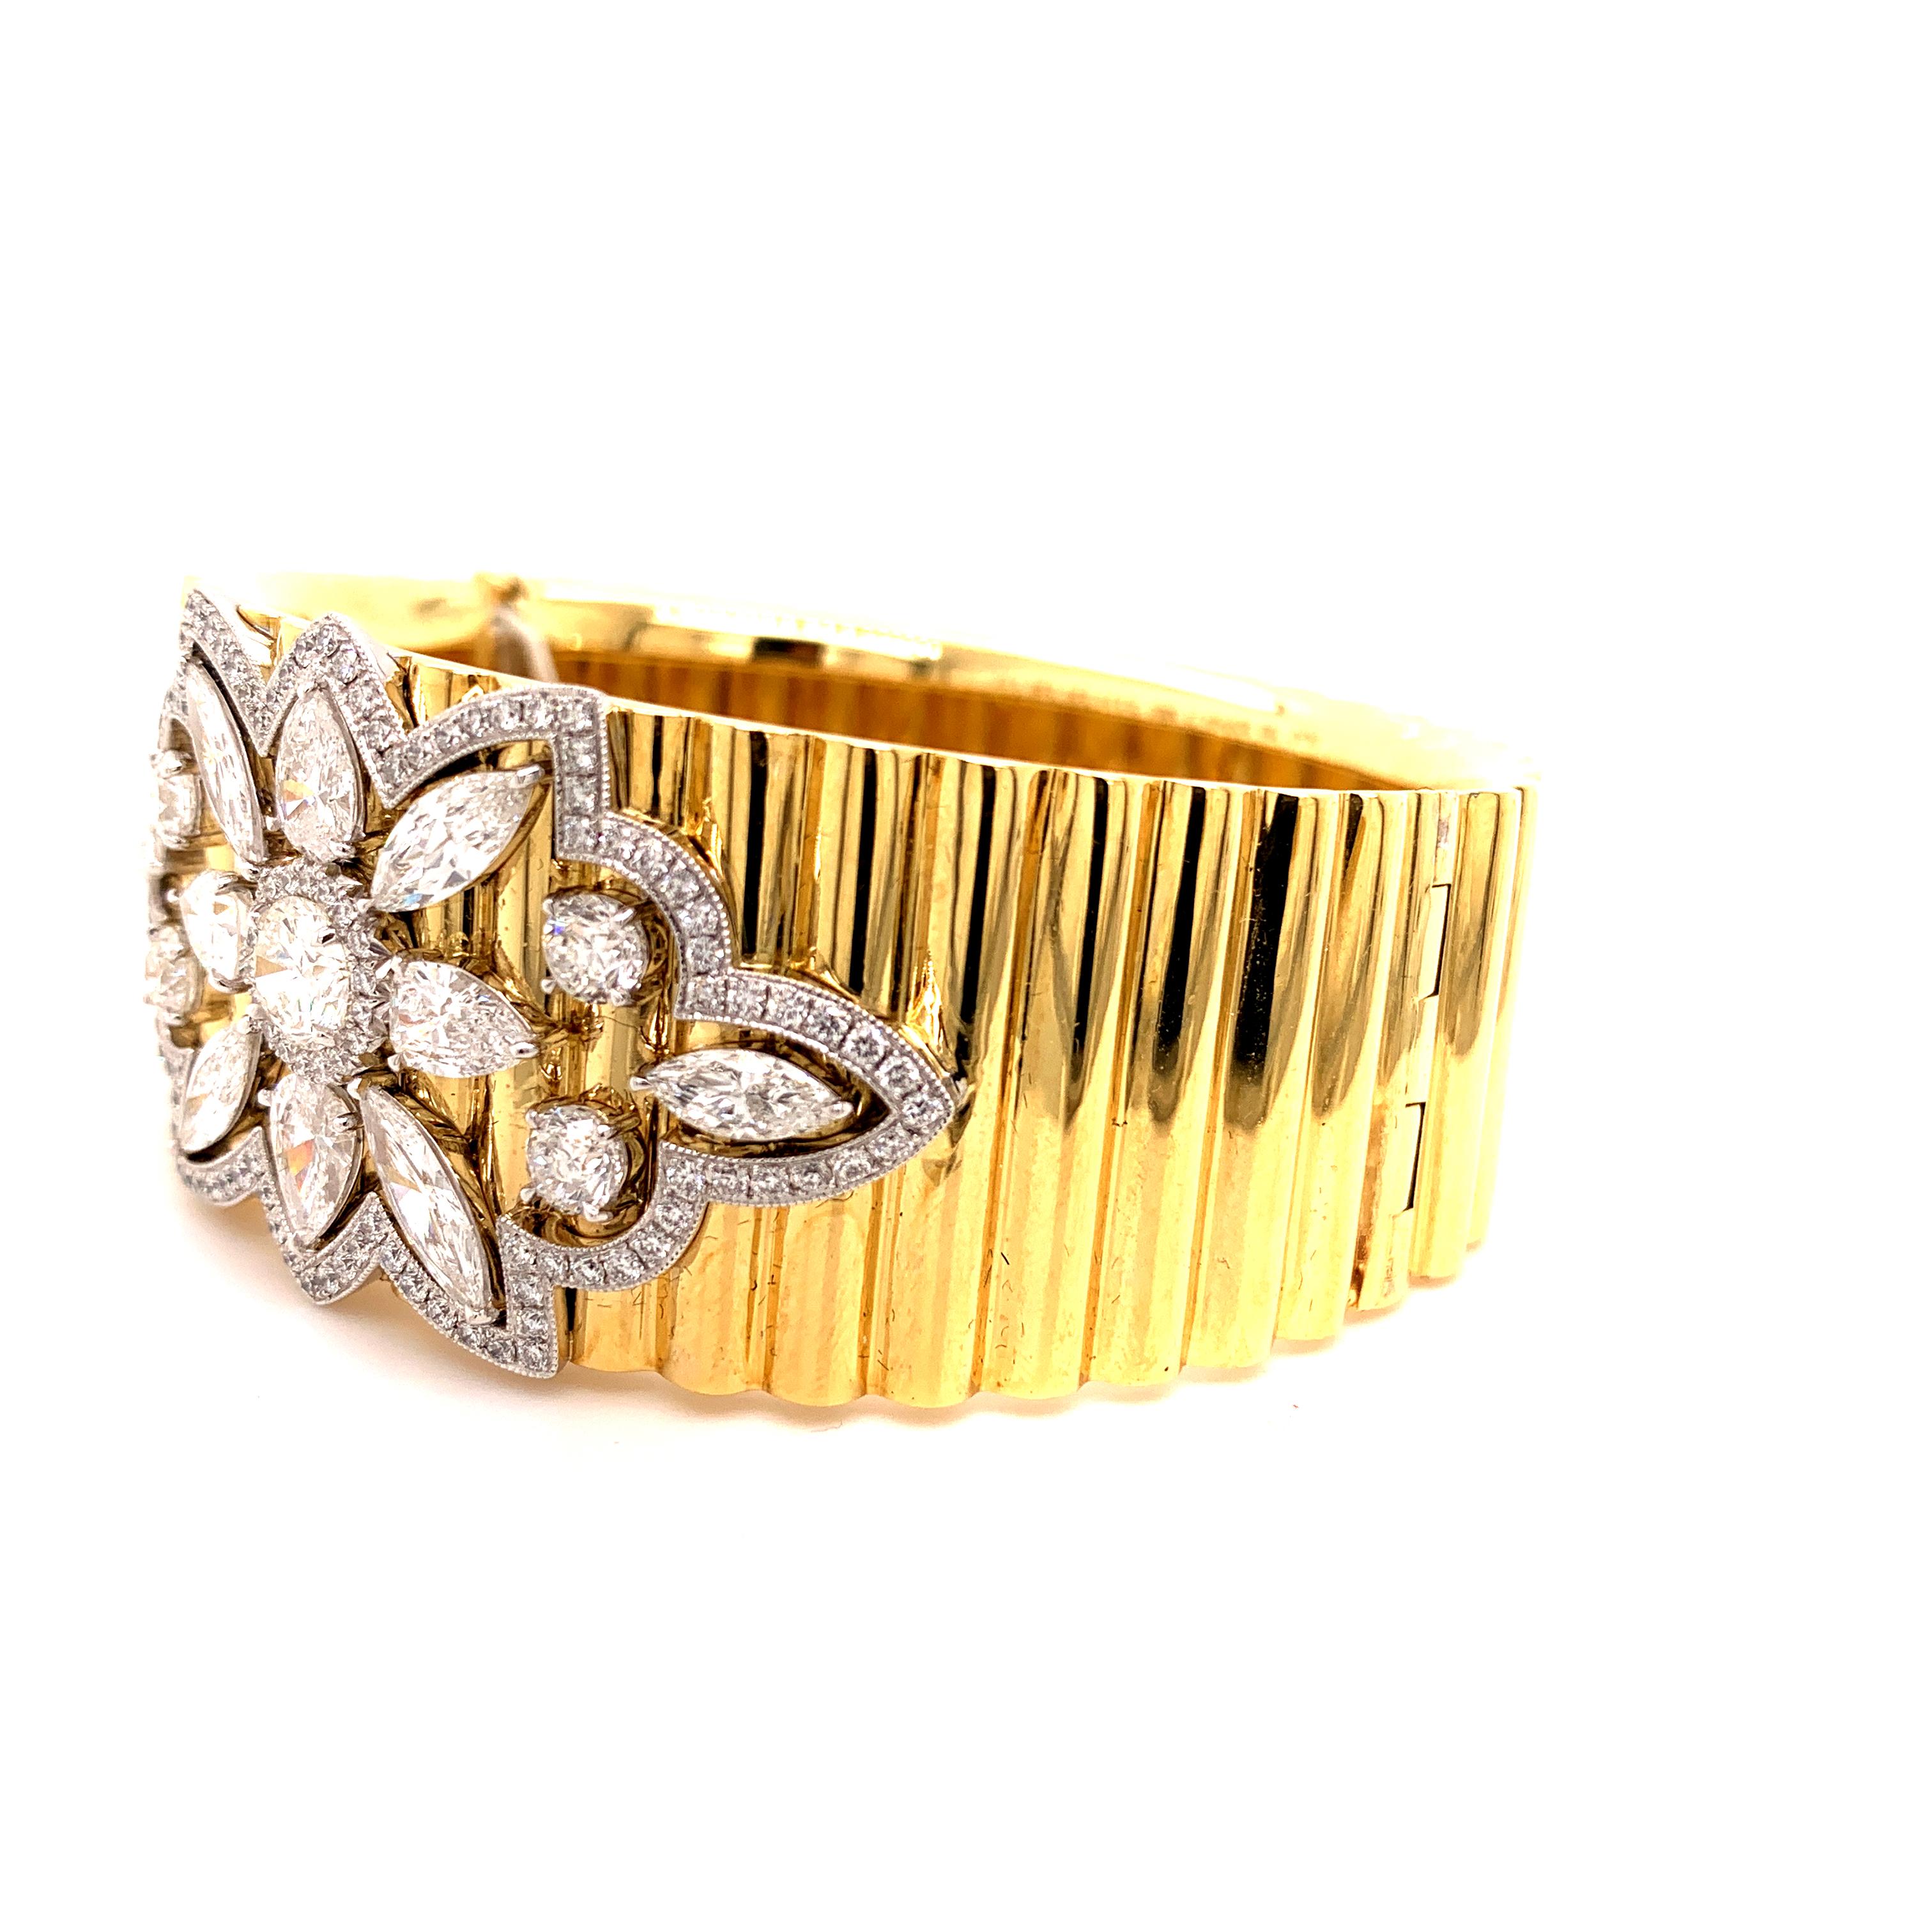 18K yellow gold bangle that features a 7.40 carat diamonds.

Sophia D by Joseph Dardashti LTD has been known worldwide for 35 years and are inspired by classic Art Deco design that merges with modern manufacturing techniques.